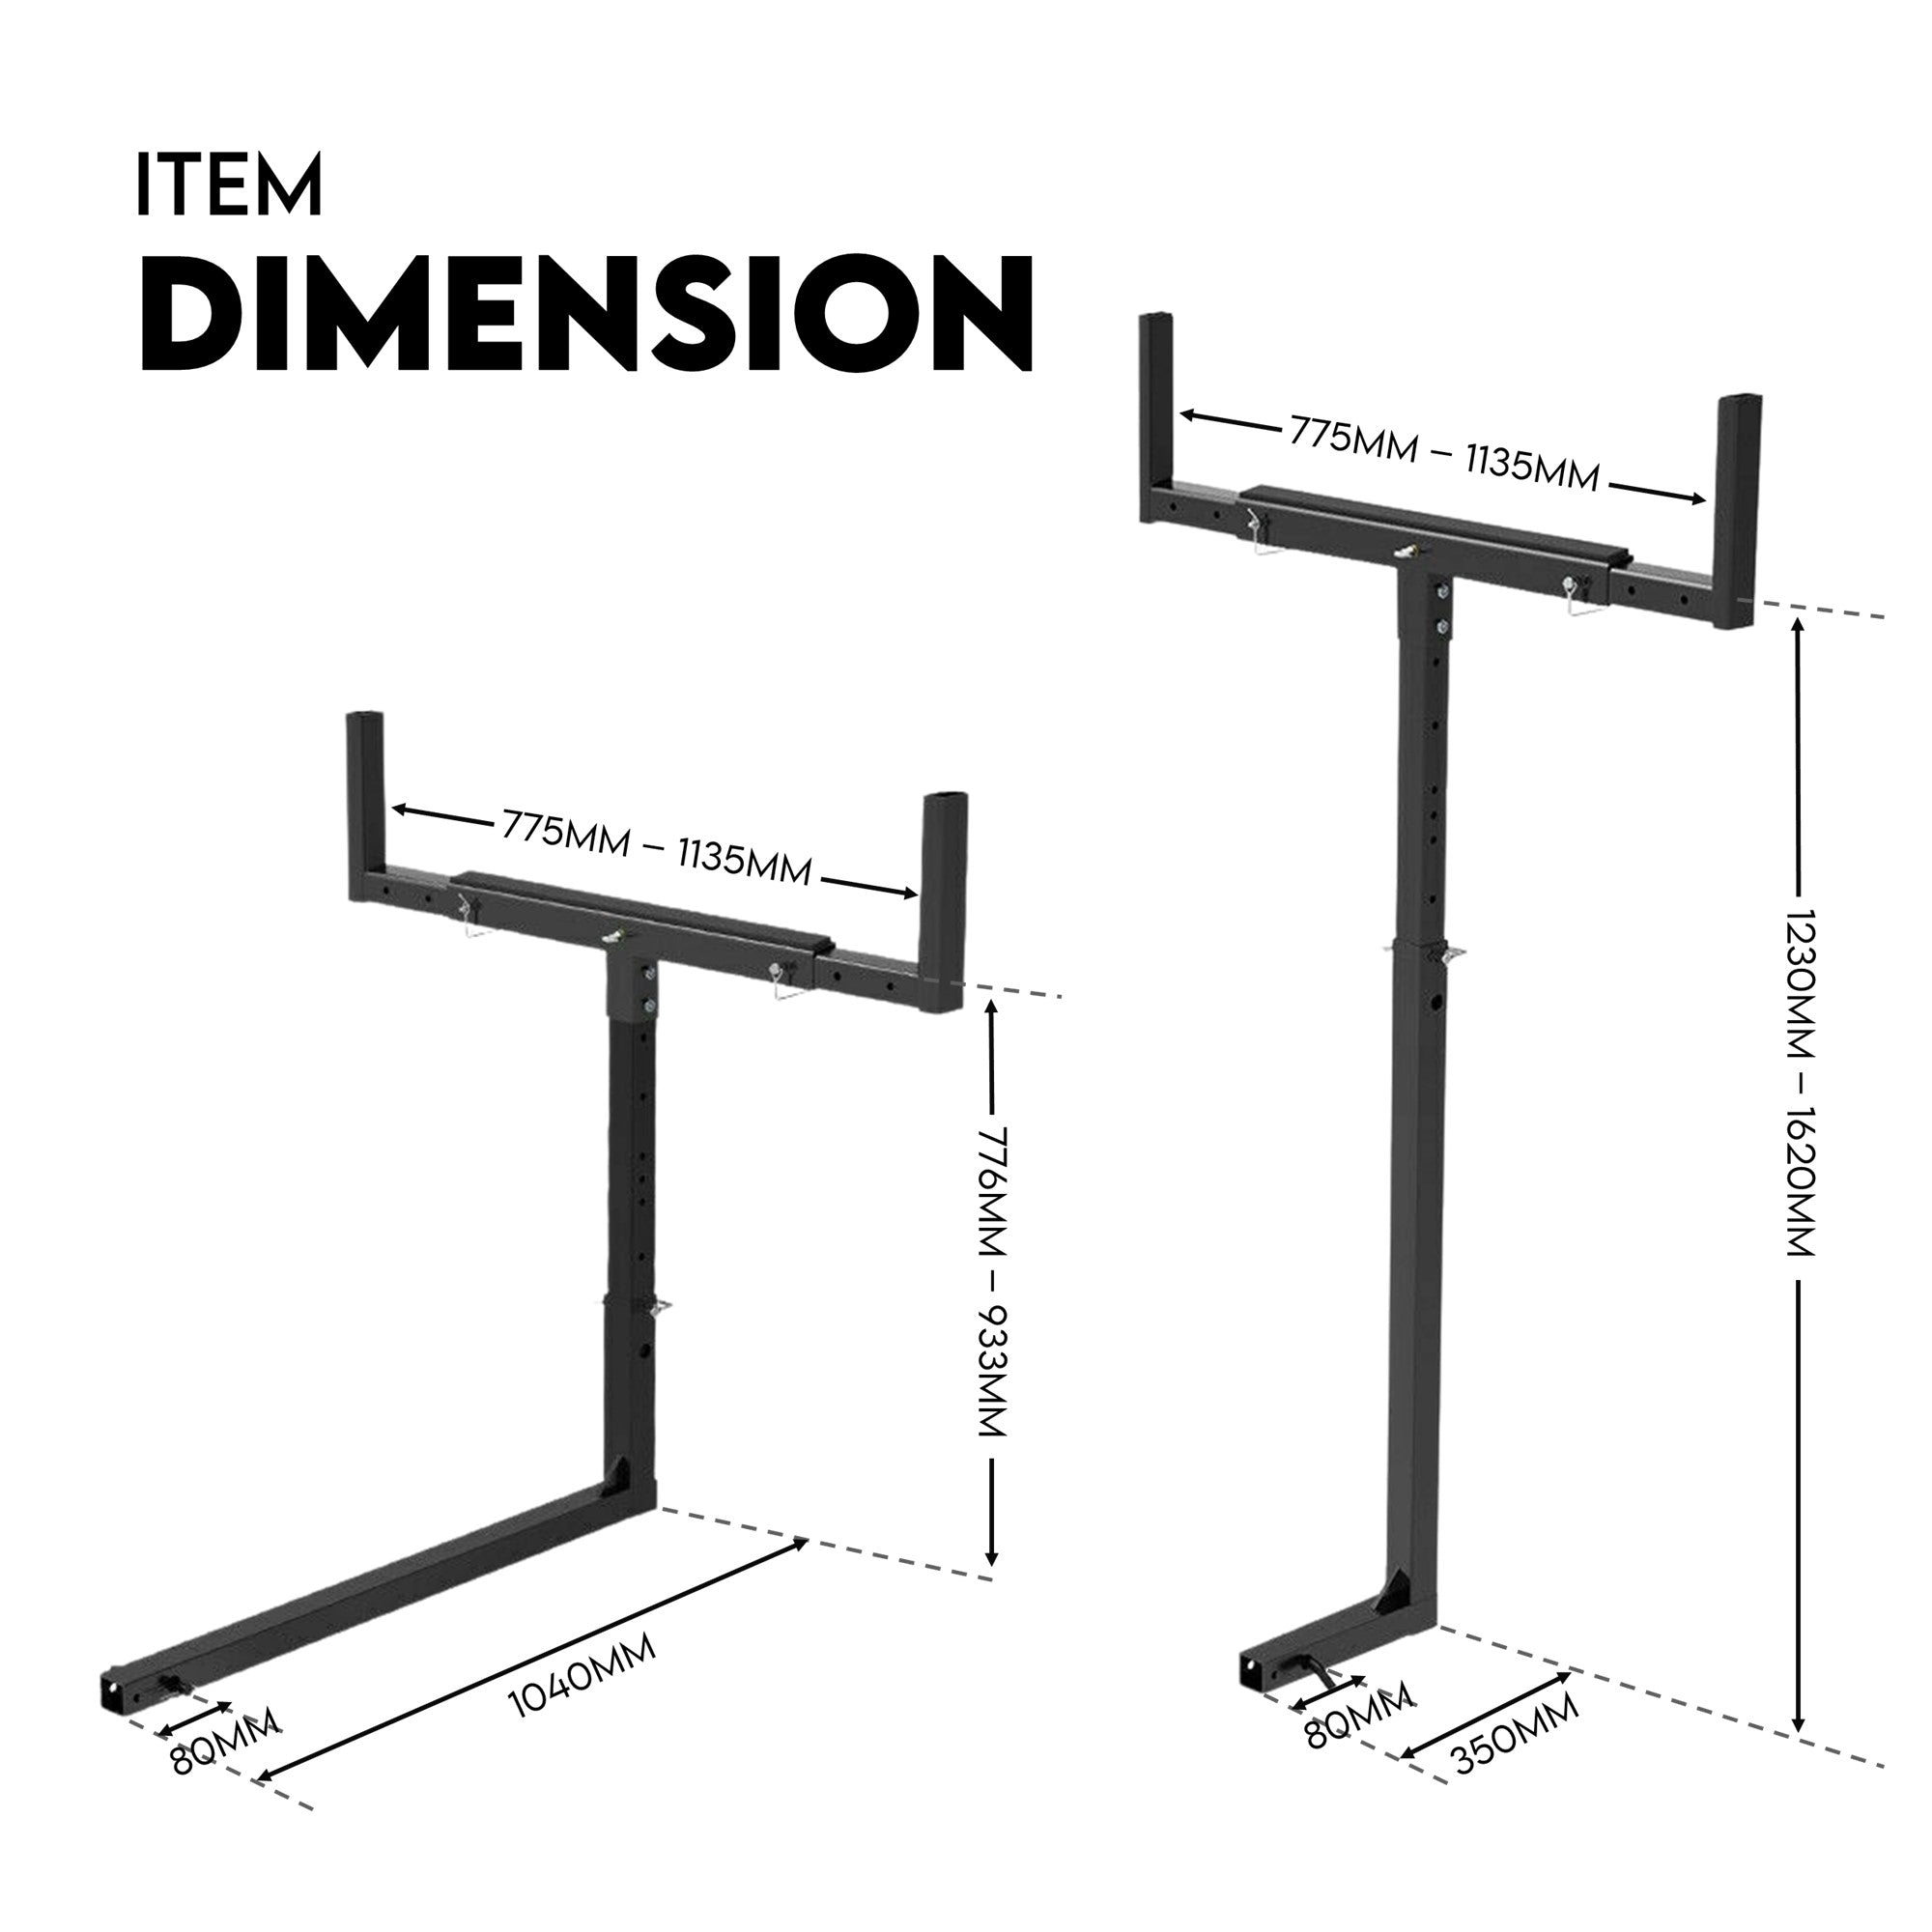 2 towing equipment dimension